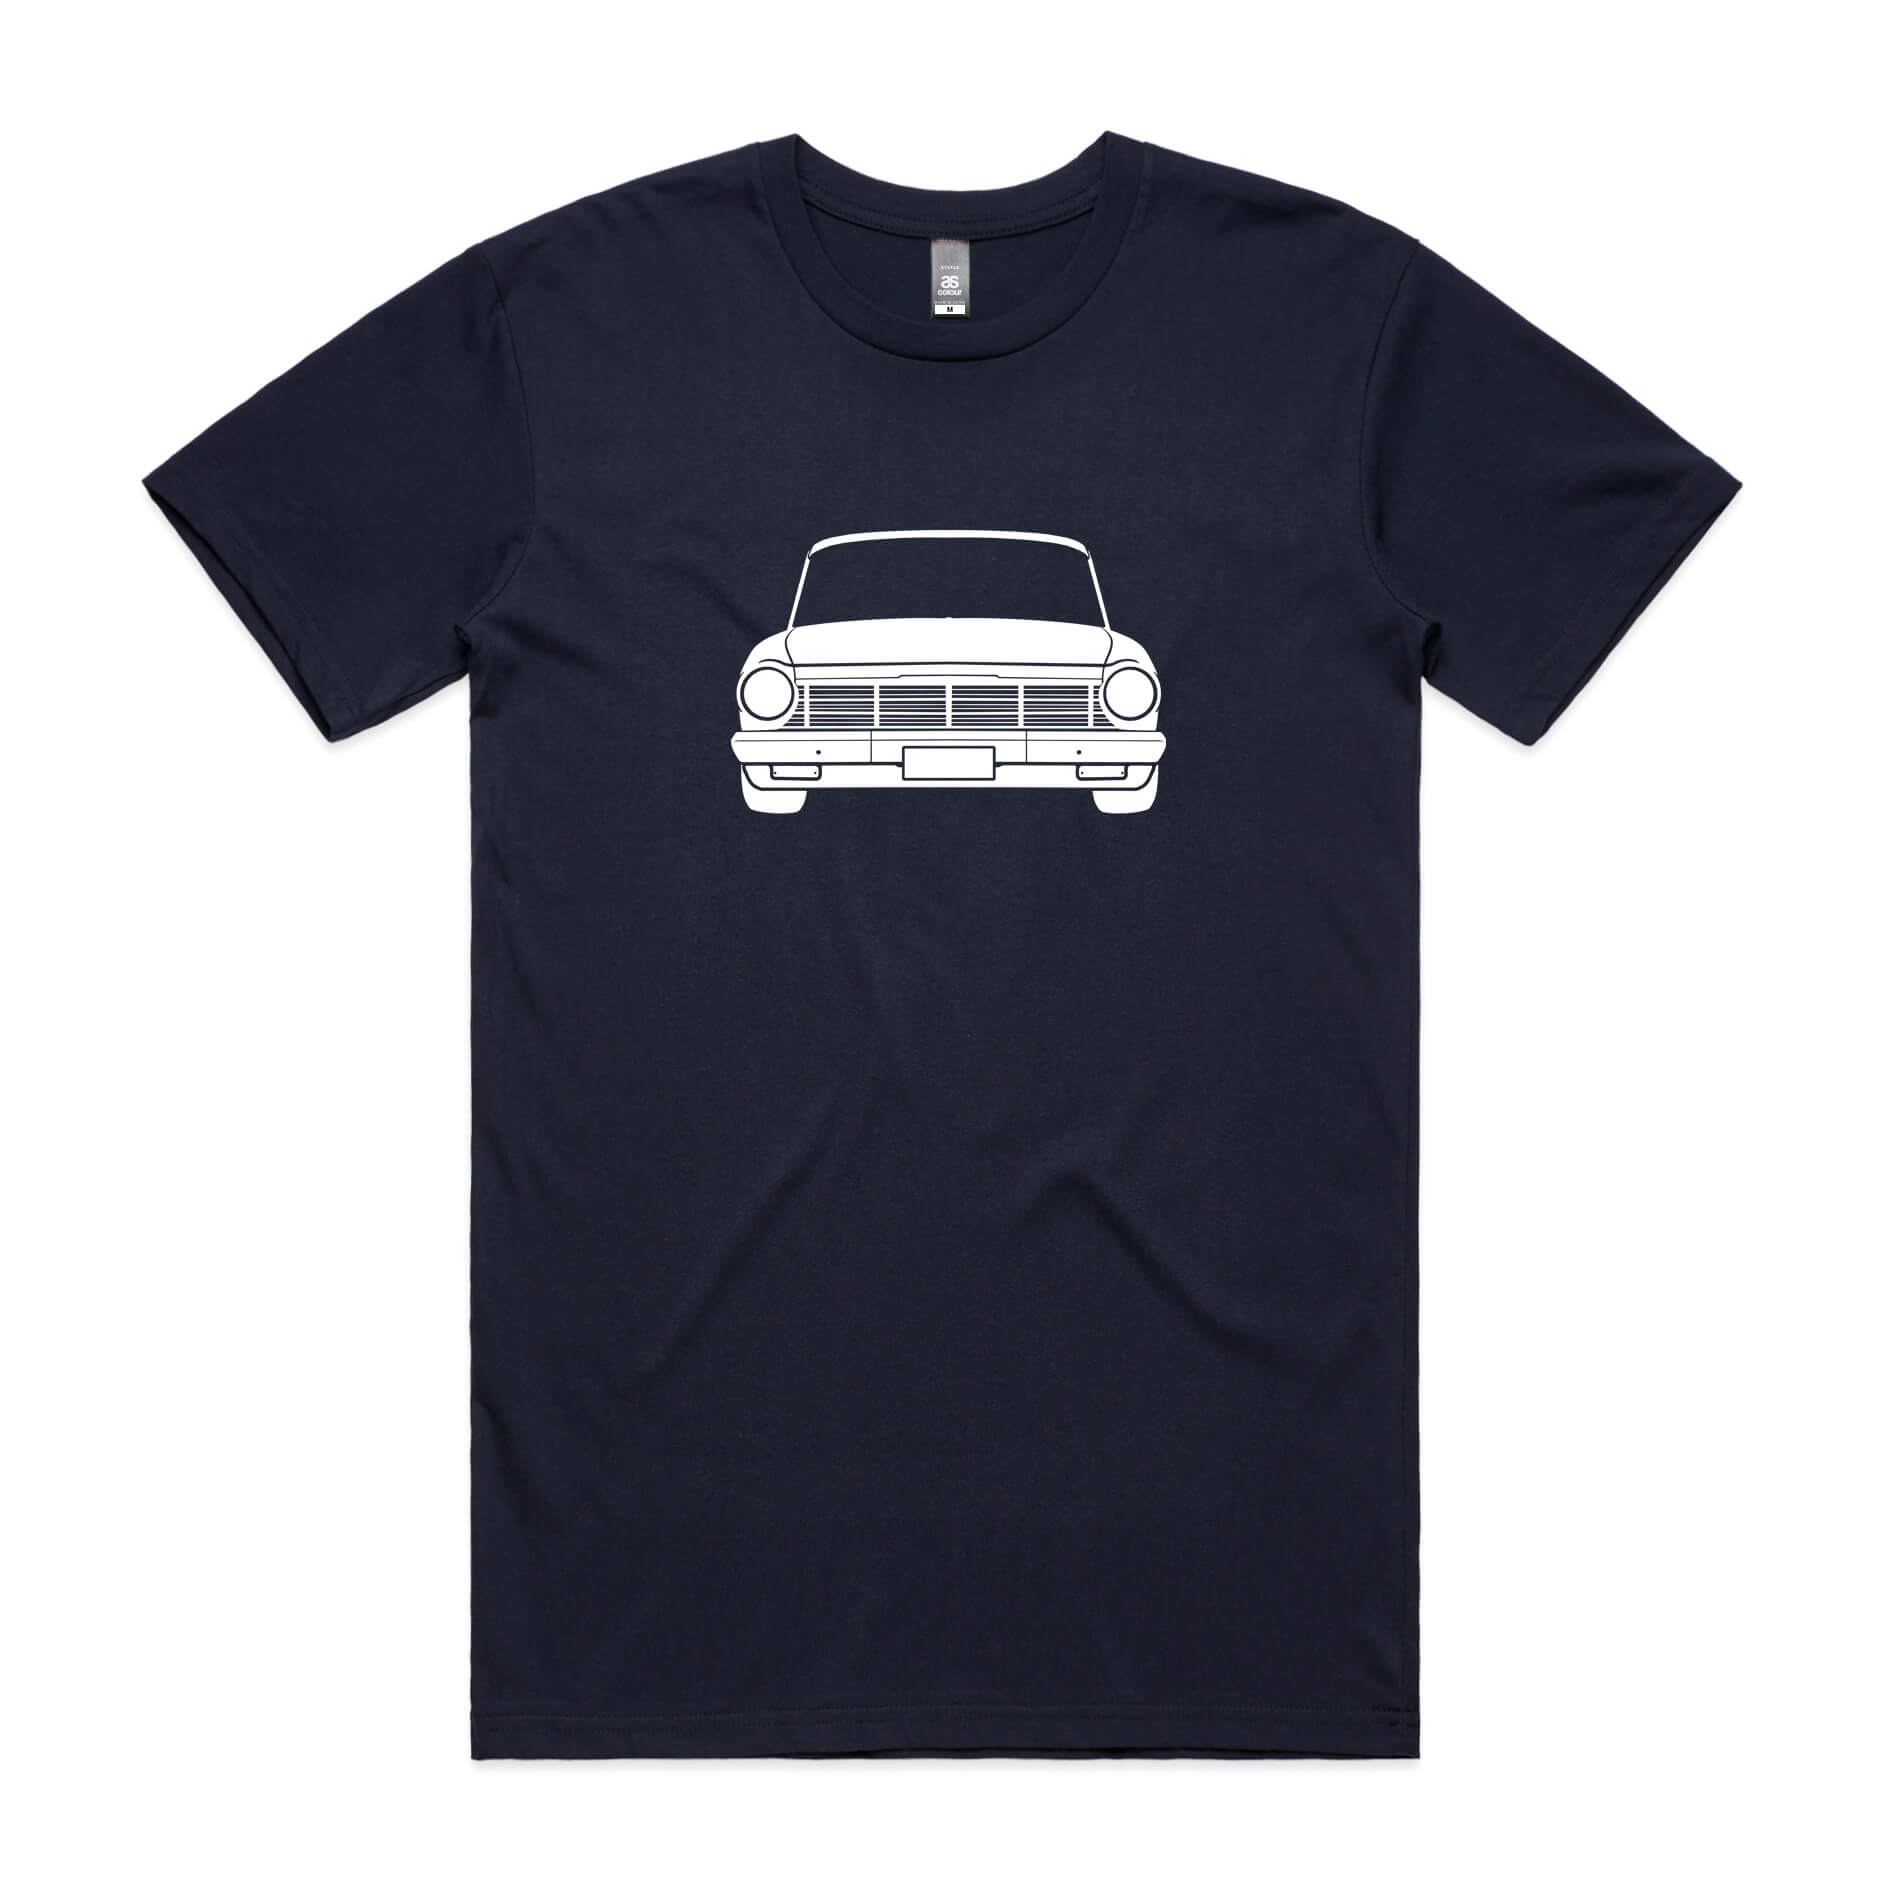 Holden EH t-shirt in navy blue with white classic car graphic